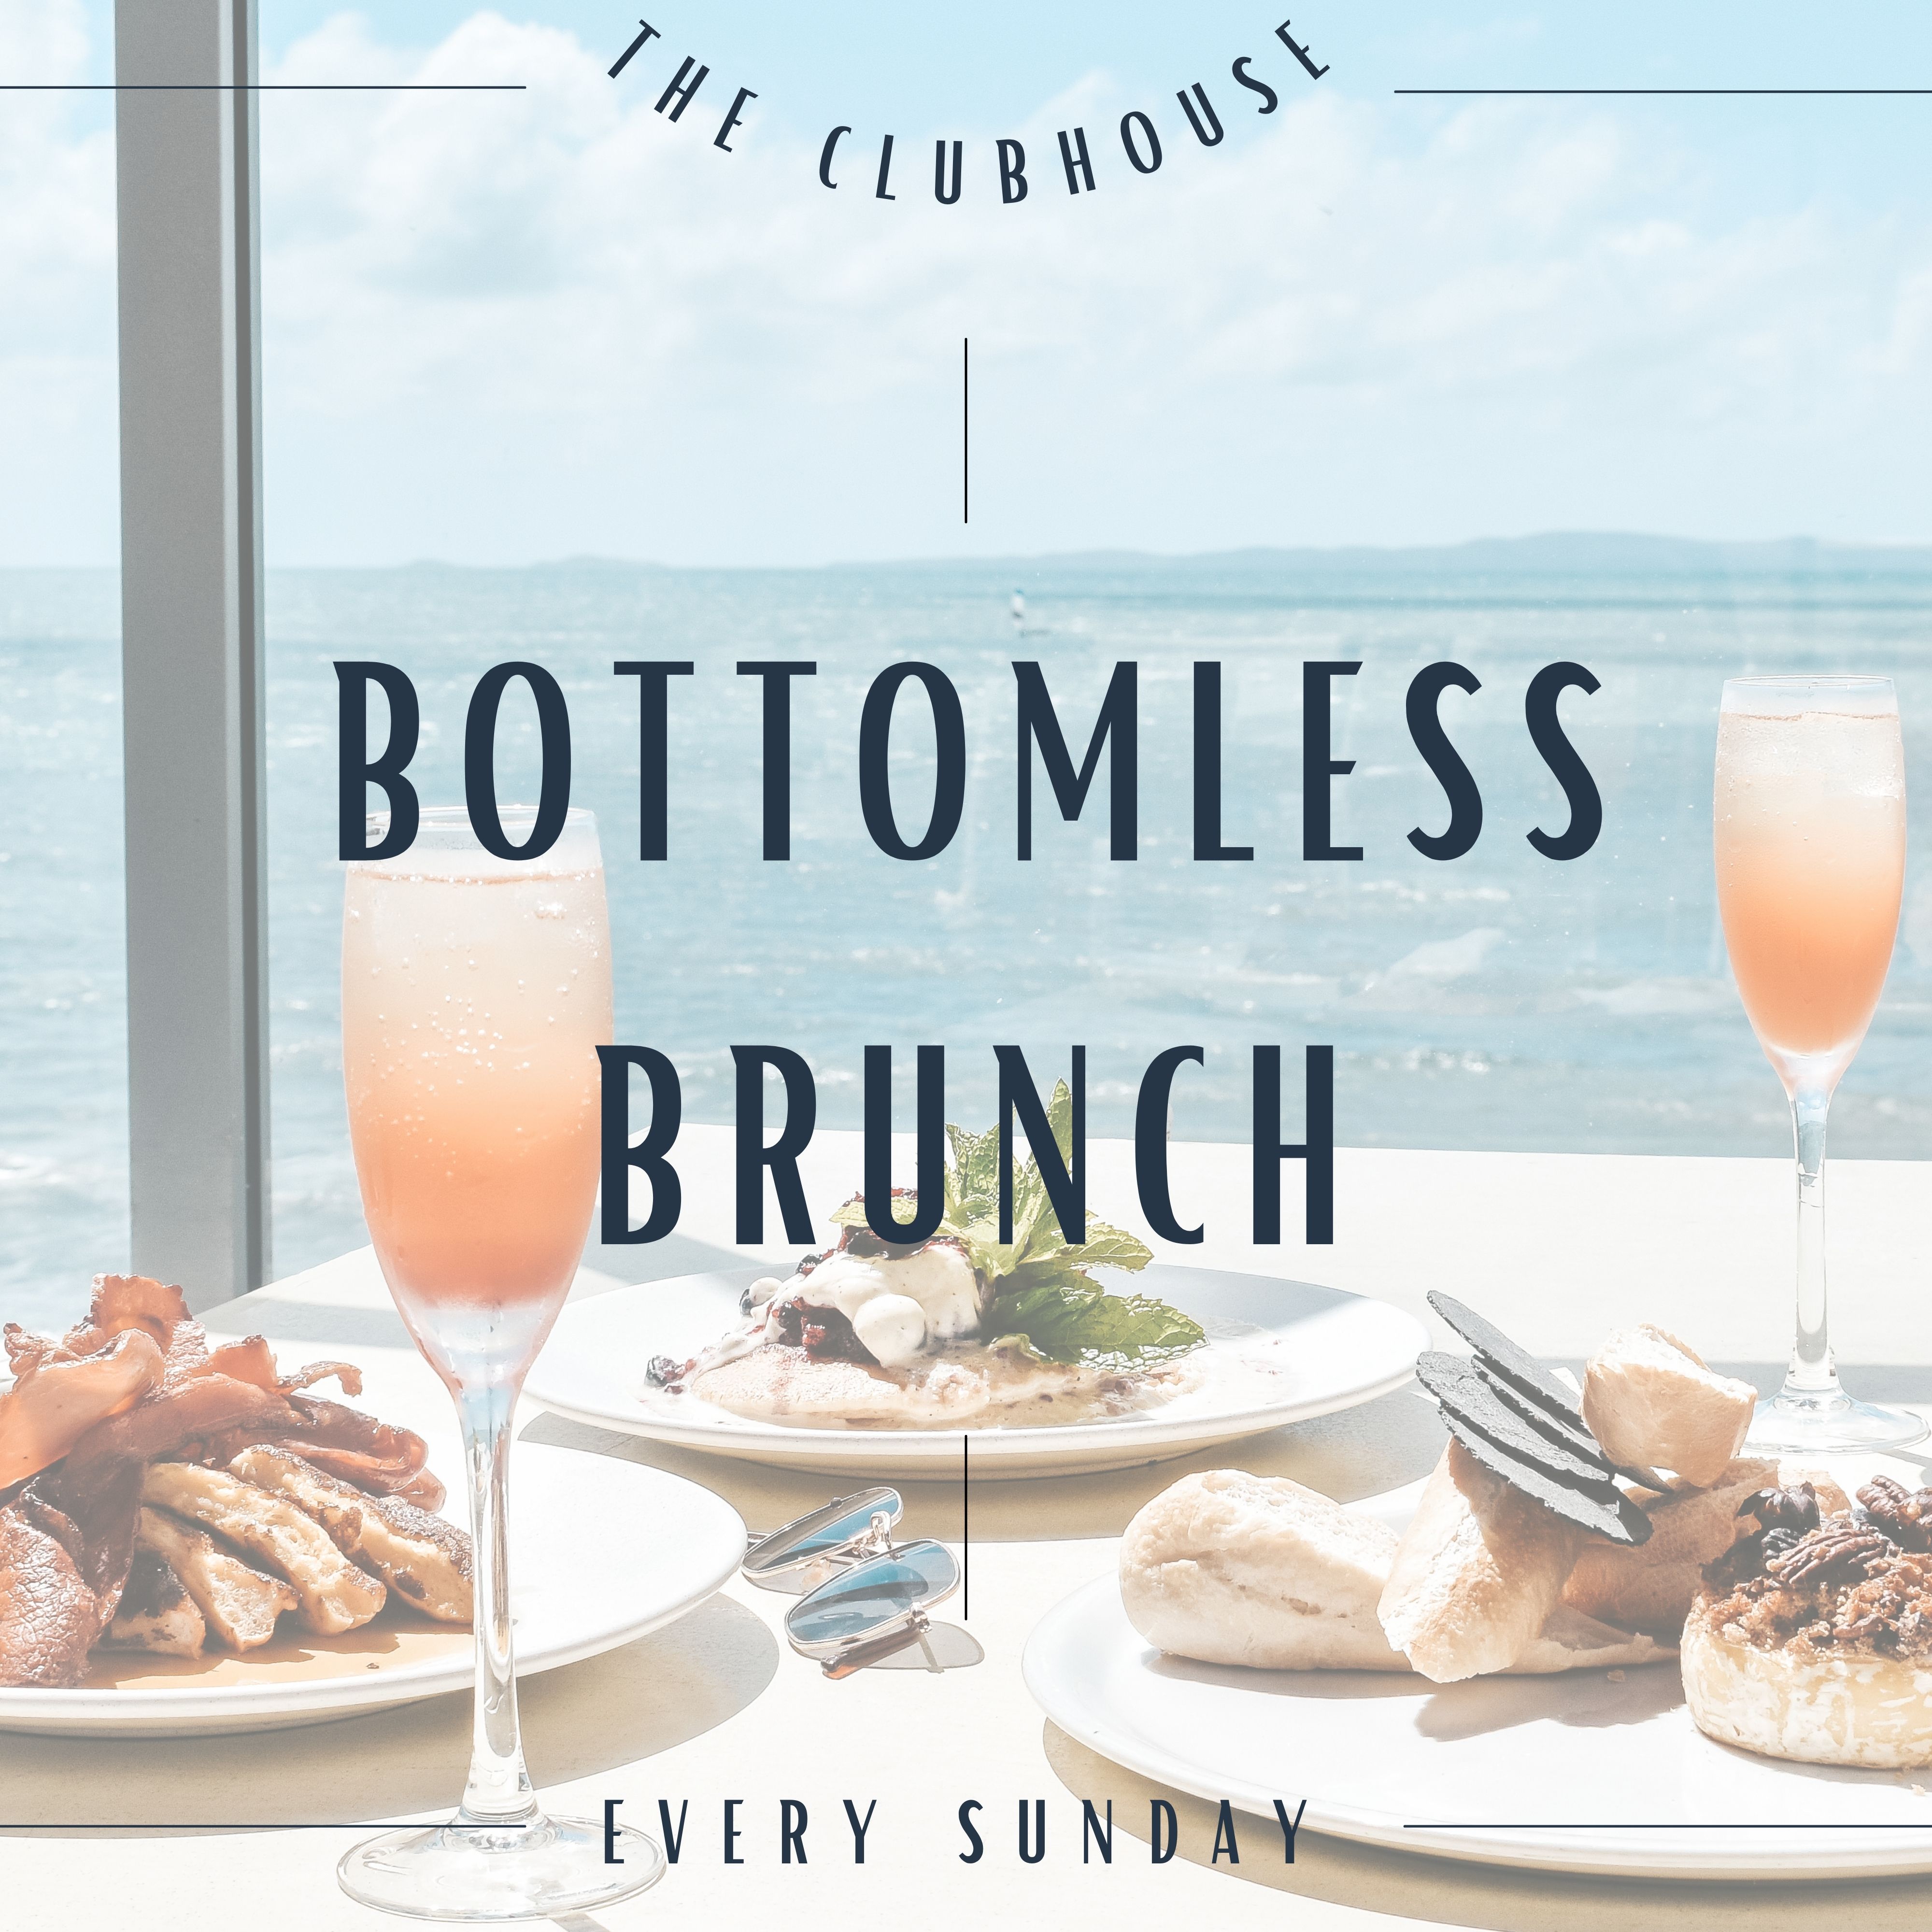 Clubhouse brunch